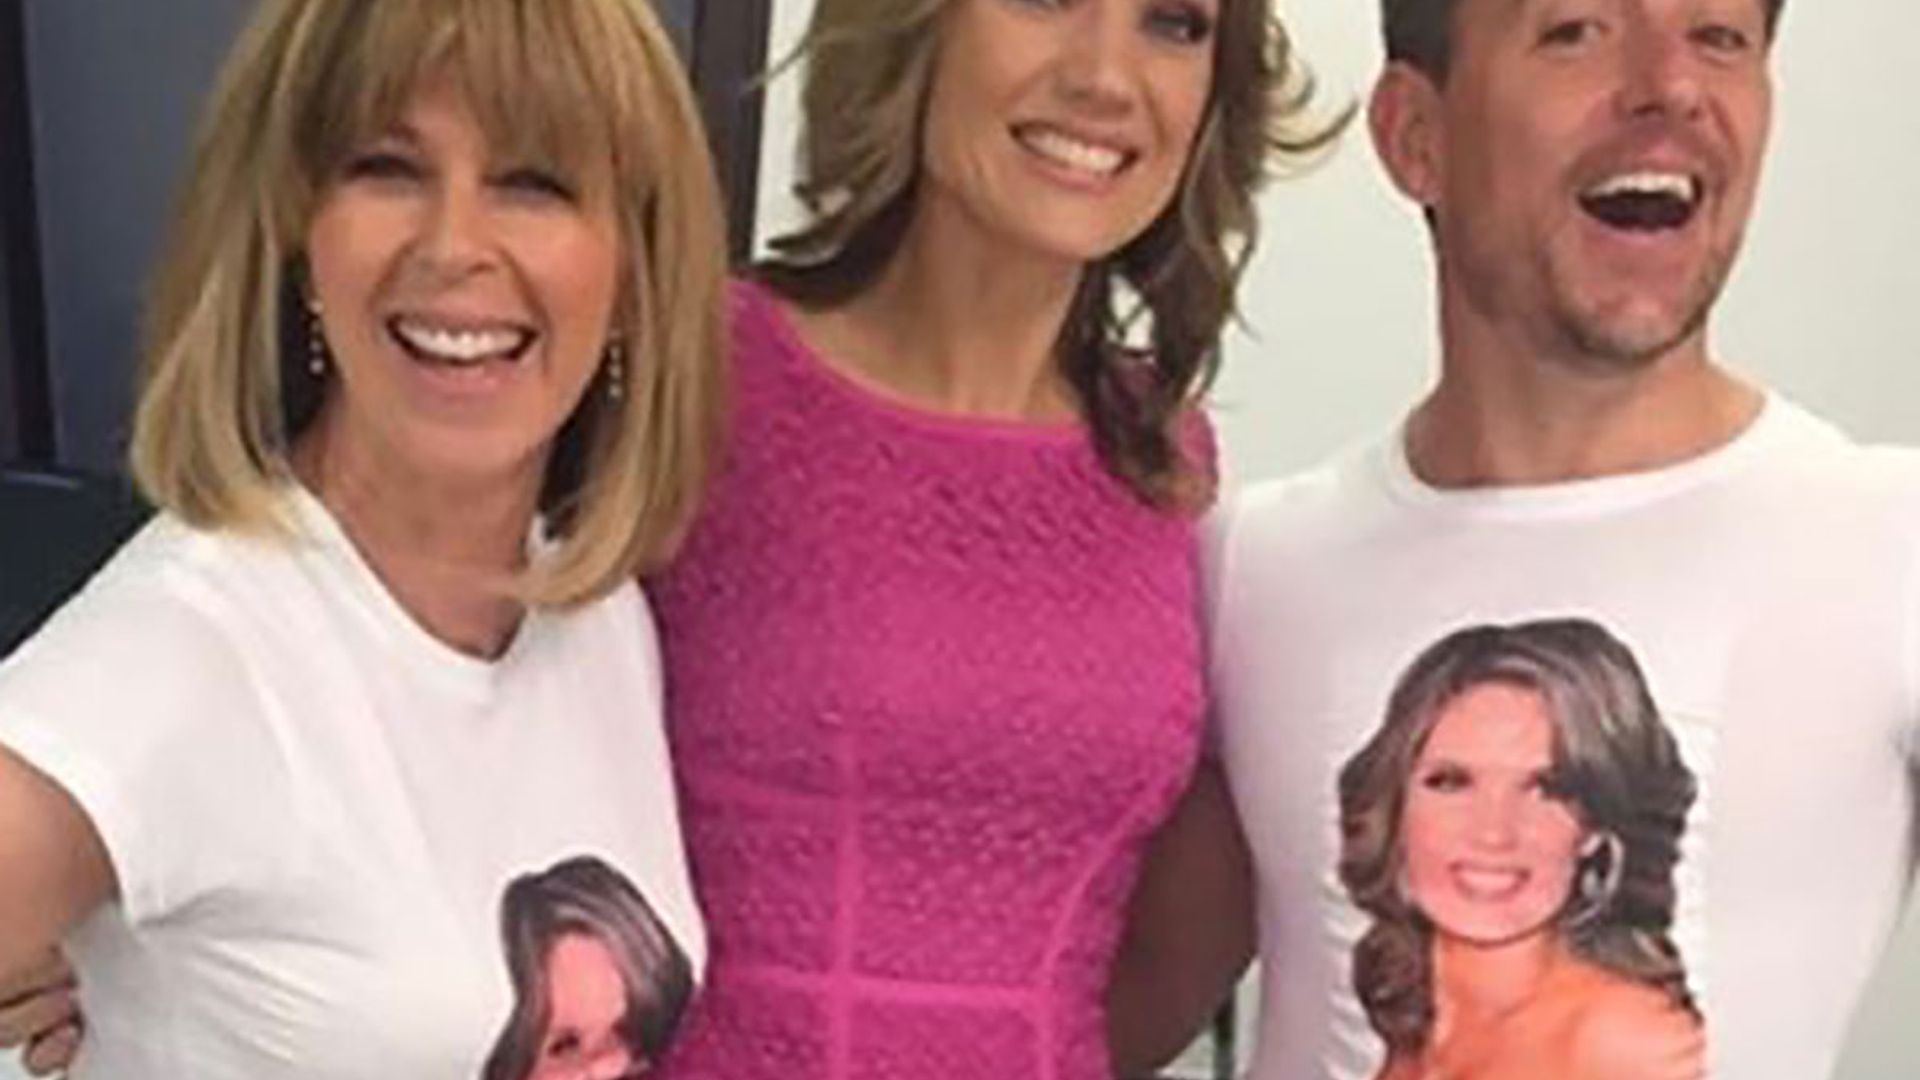 Ben Shephard shares rare picture of Charlotte Hawkins to mark her 45th birthday